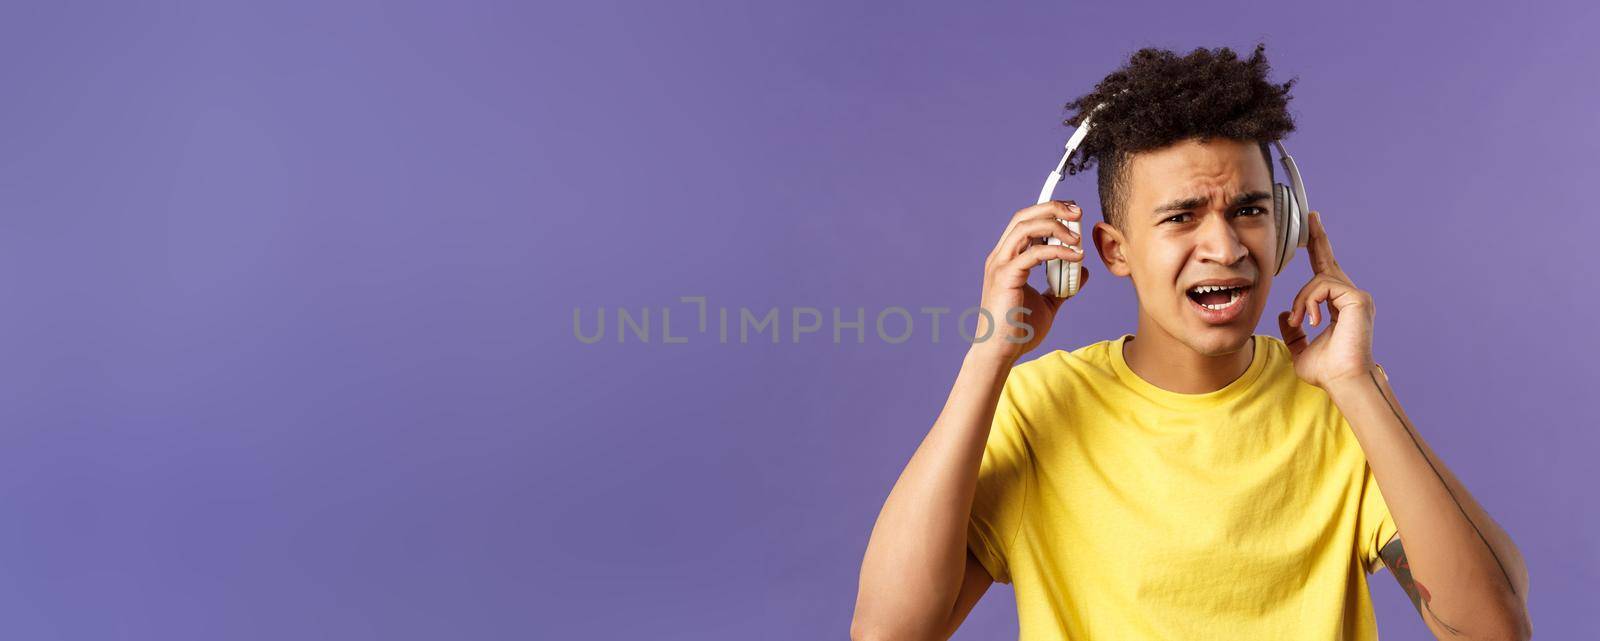 Cant hear you, repeat please. Portrait of young bothered guy interrupted of listening music, take-off headphones to answer person question, squinting look confused, purple background by Benzoix